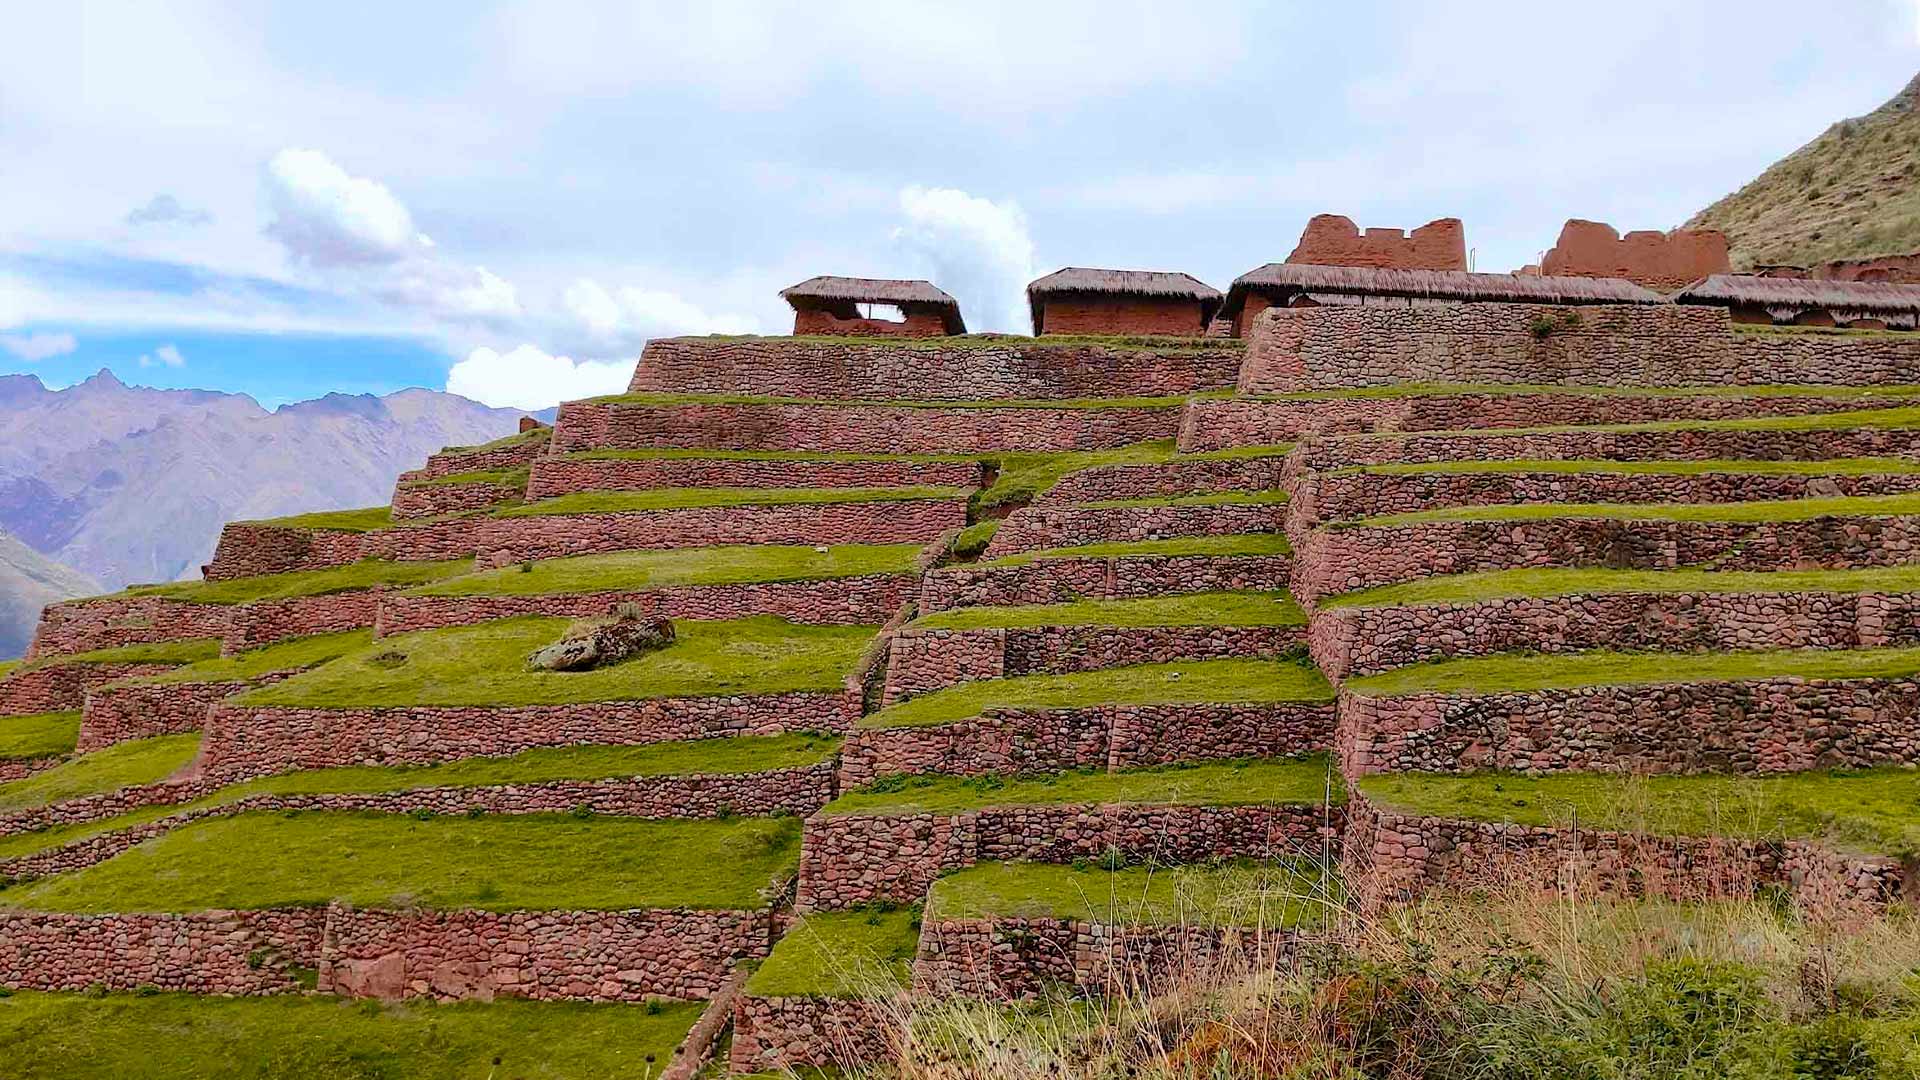 Photo of the terraces of the archaeological site of Huchuy Qosqo